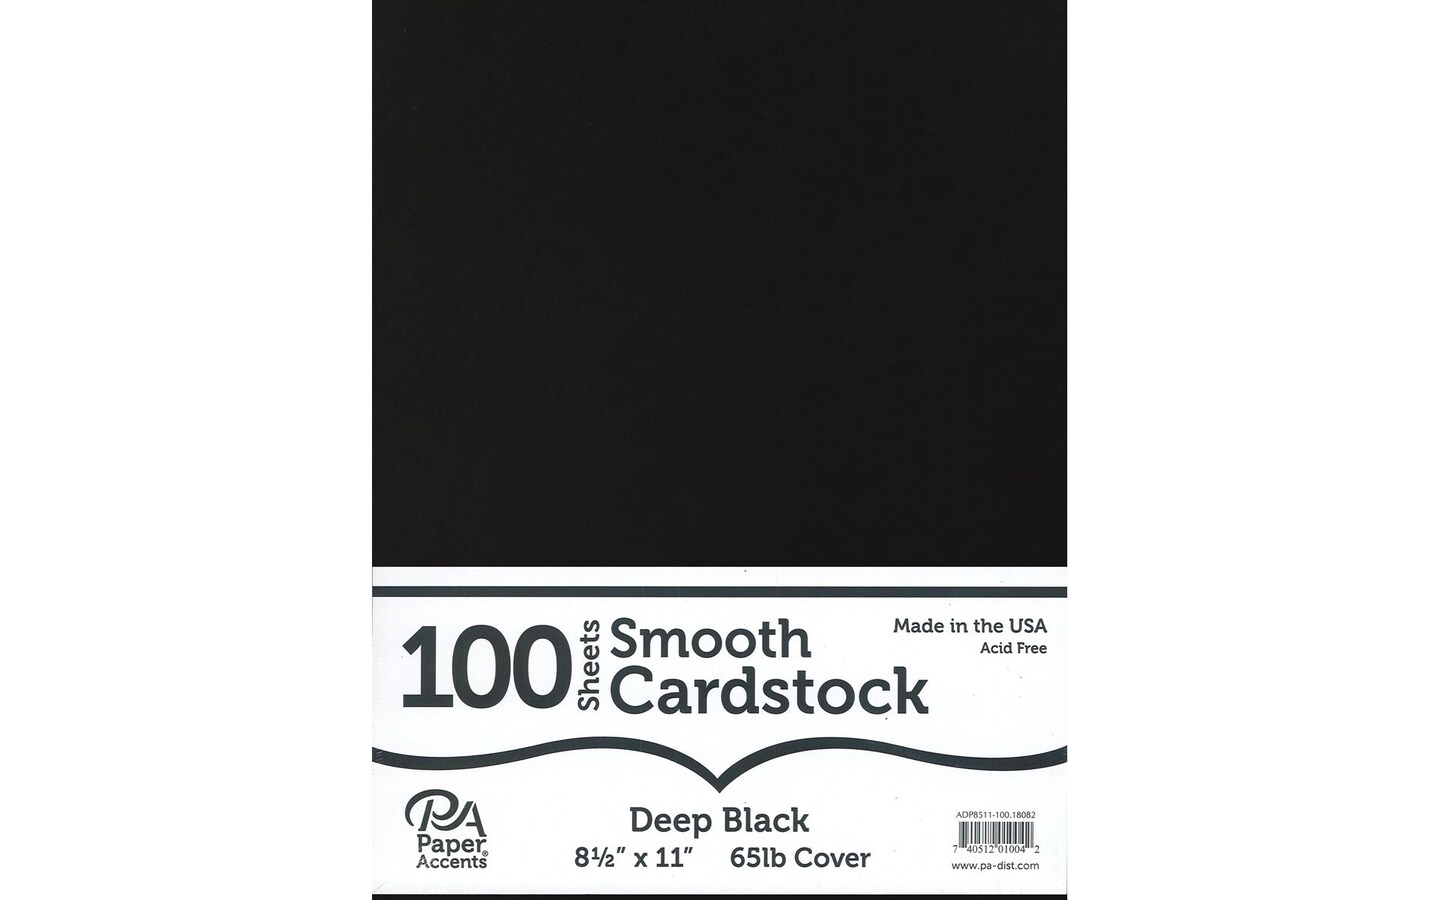 PA Paper Accents Smooth Cardstock 8.5 x 11 Deep Black, 65lb colored  cardstock paper for card making, scrapbooking, printing, quilling and  crafts, 100 piece pack